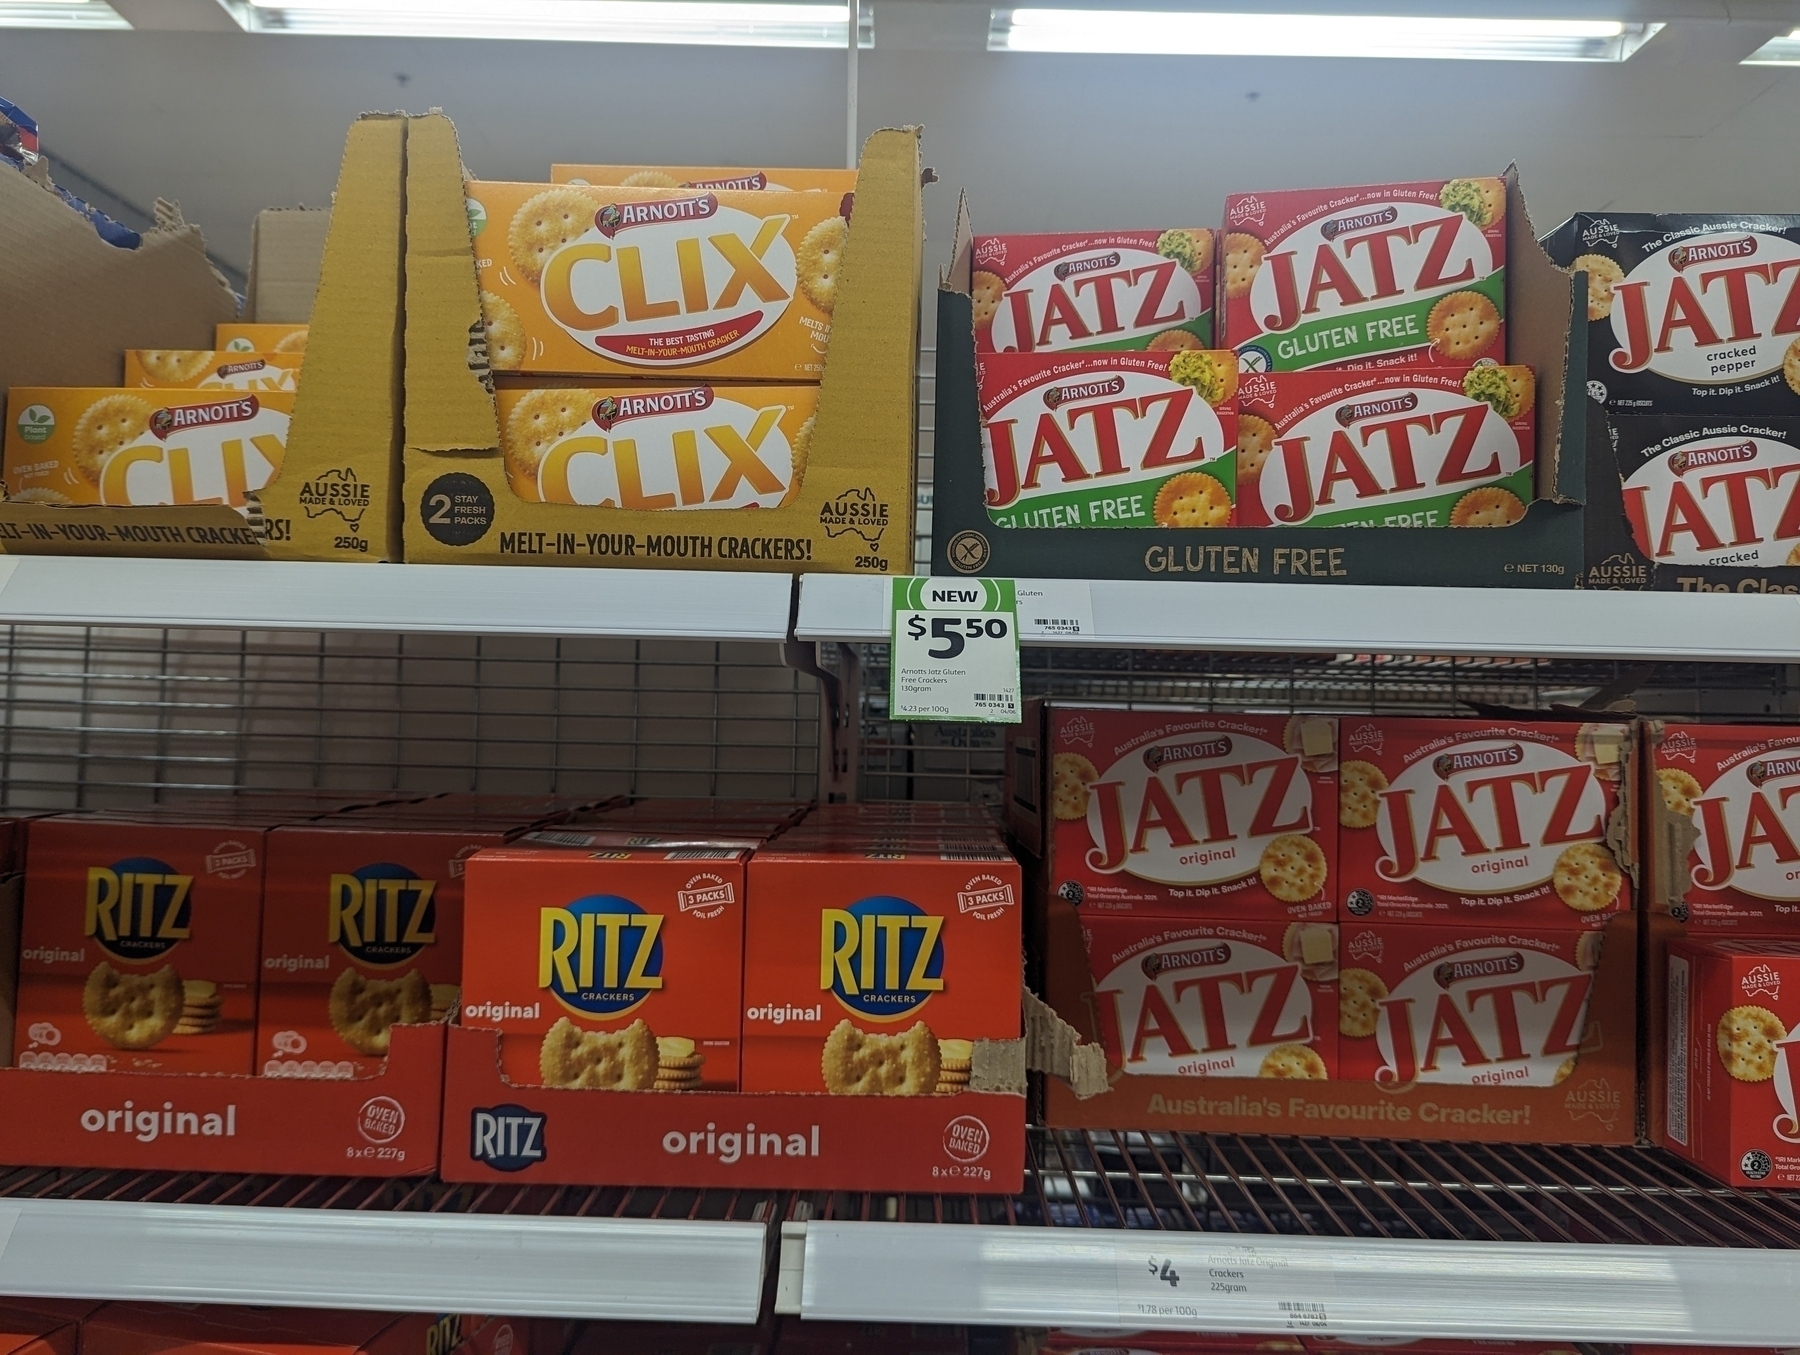 Auto generated description: A supermarket shelf displays various brands of crackers, including Arnott's Jatz, Ritz, and Clix, with a price tag indicating $5.50 for one of the products.